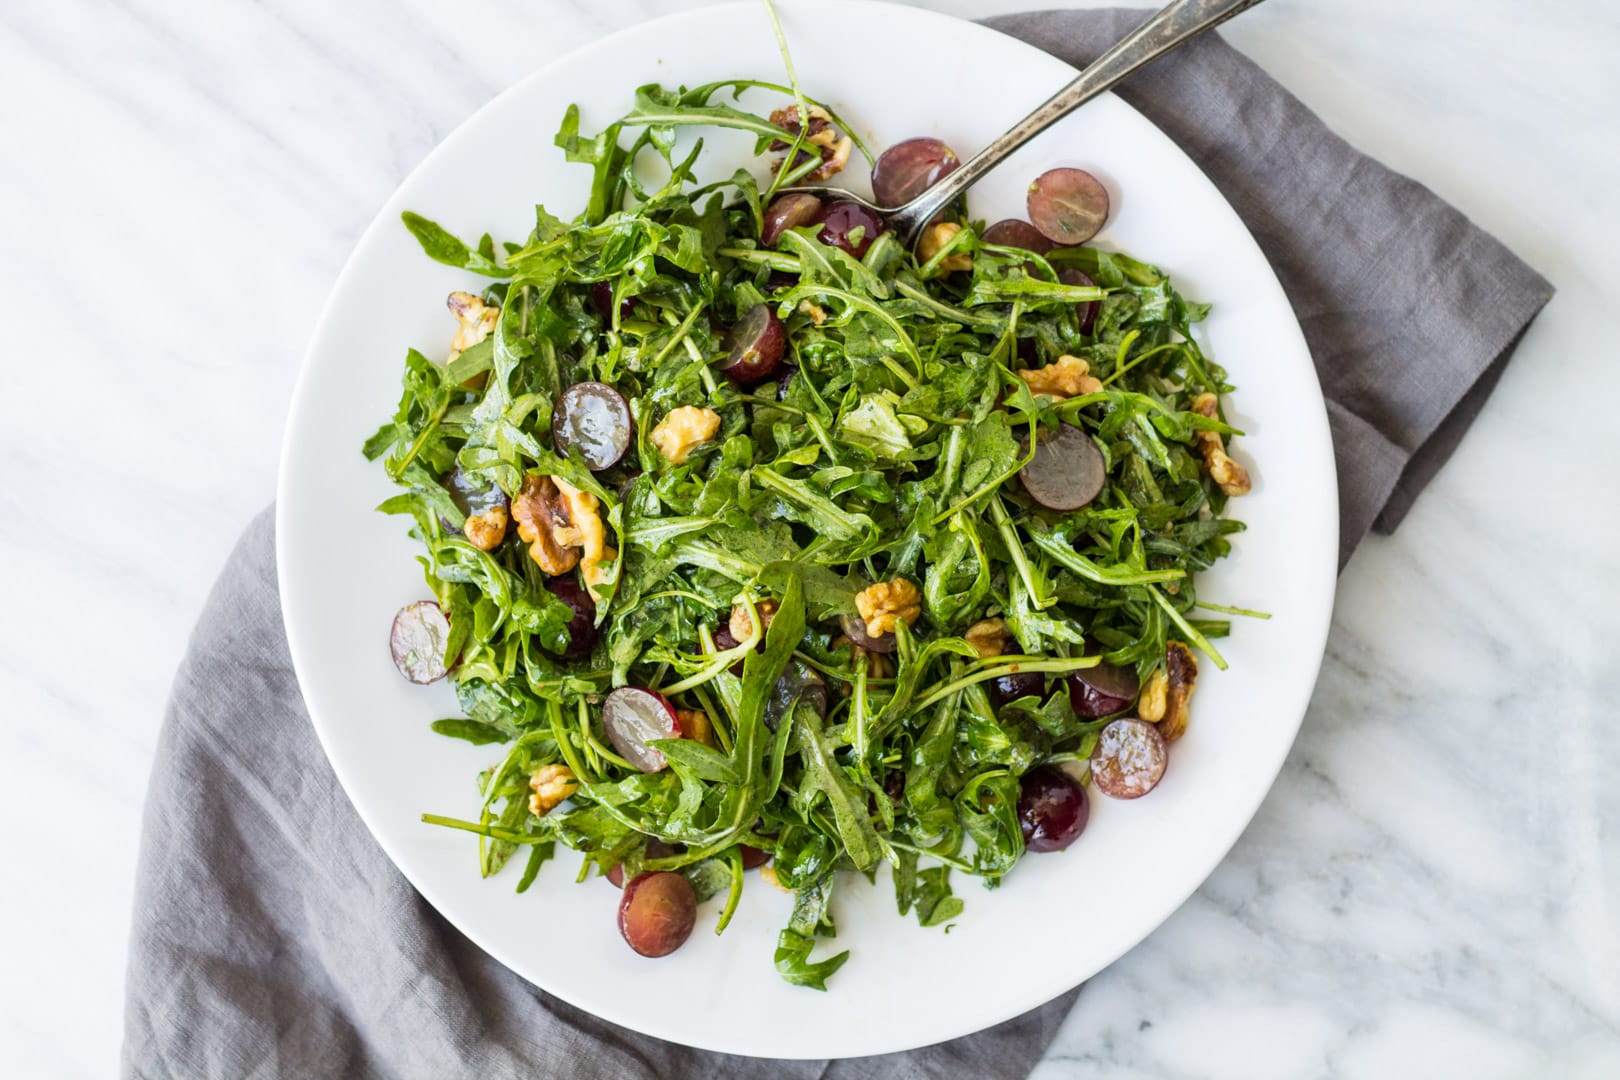 Looking down at a plate of arugula salad with grapes and walnuts.